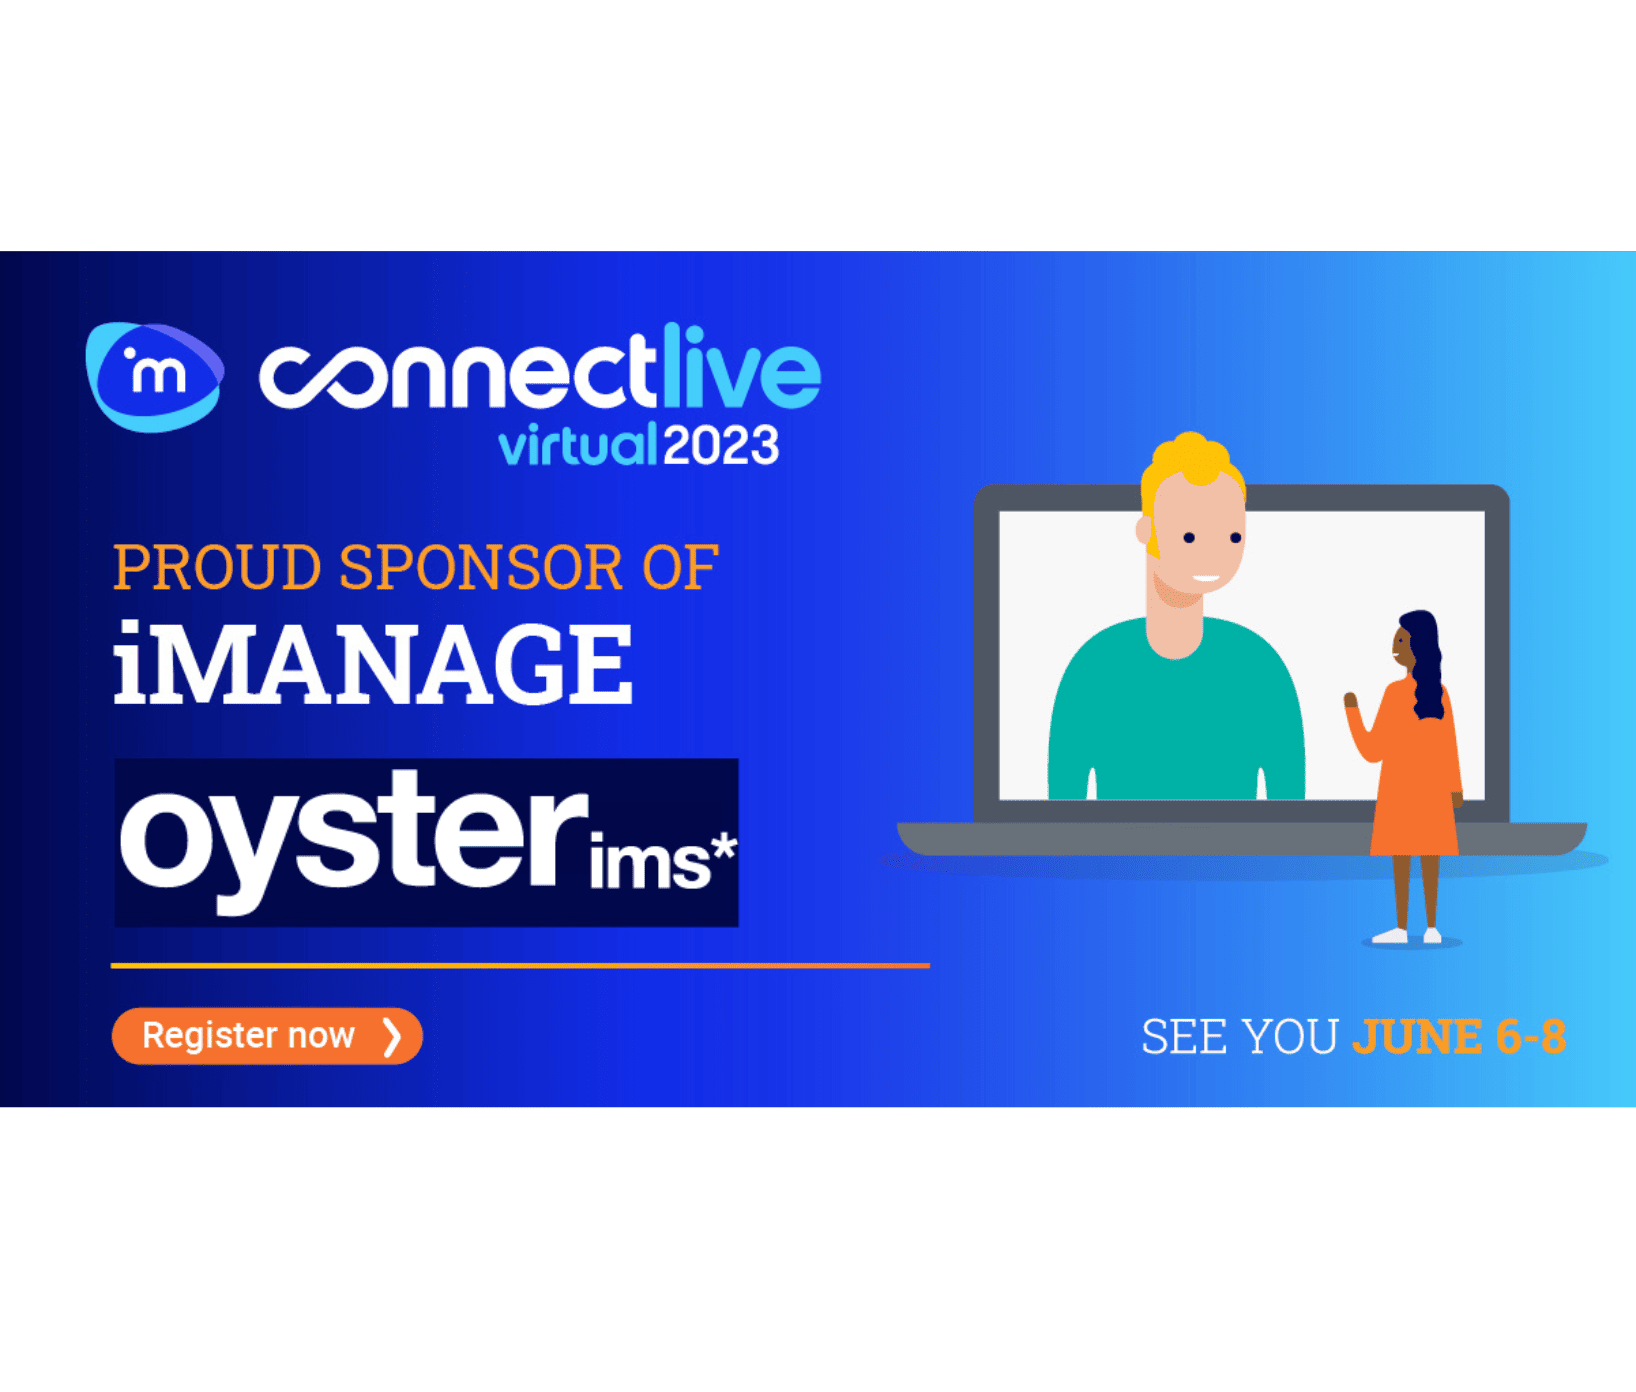 View - Oyster IMS sponsors iManage ConnectLive 2023